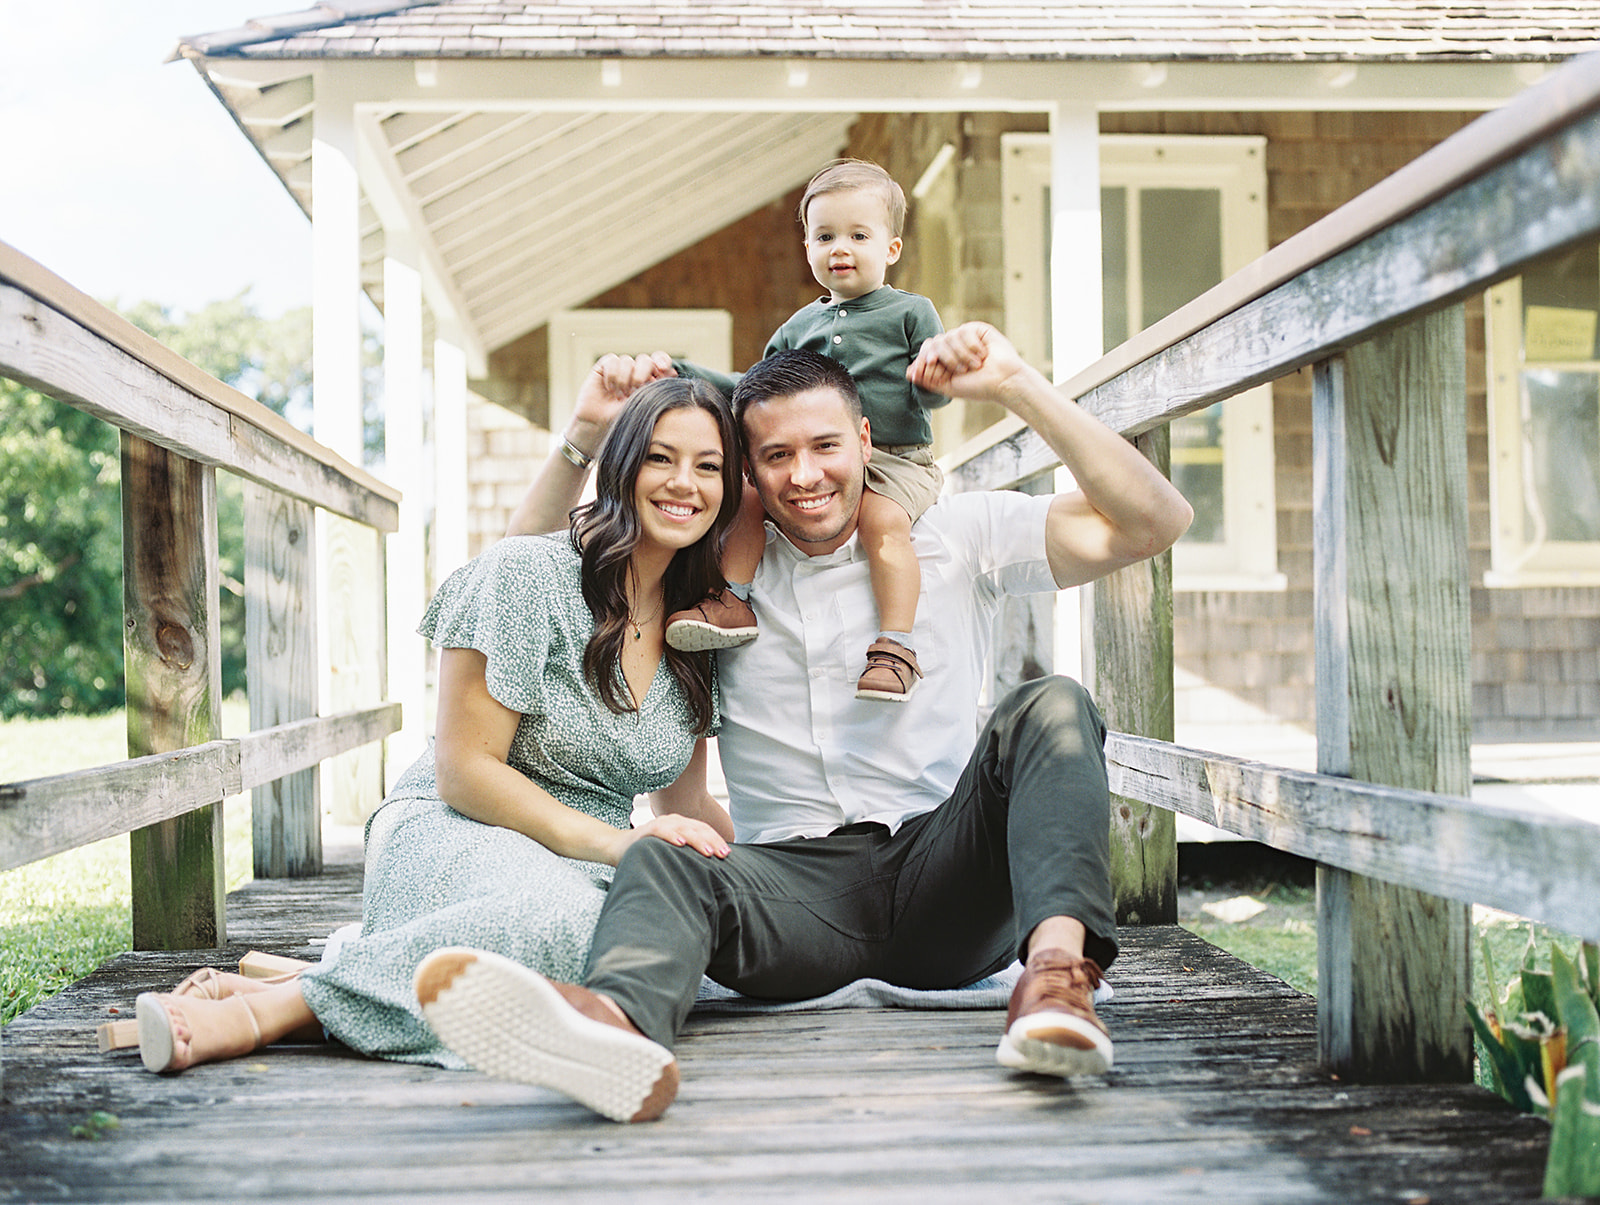 MLB player Patrick Corbin and his family at their west palm beach family photo session